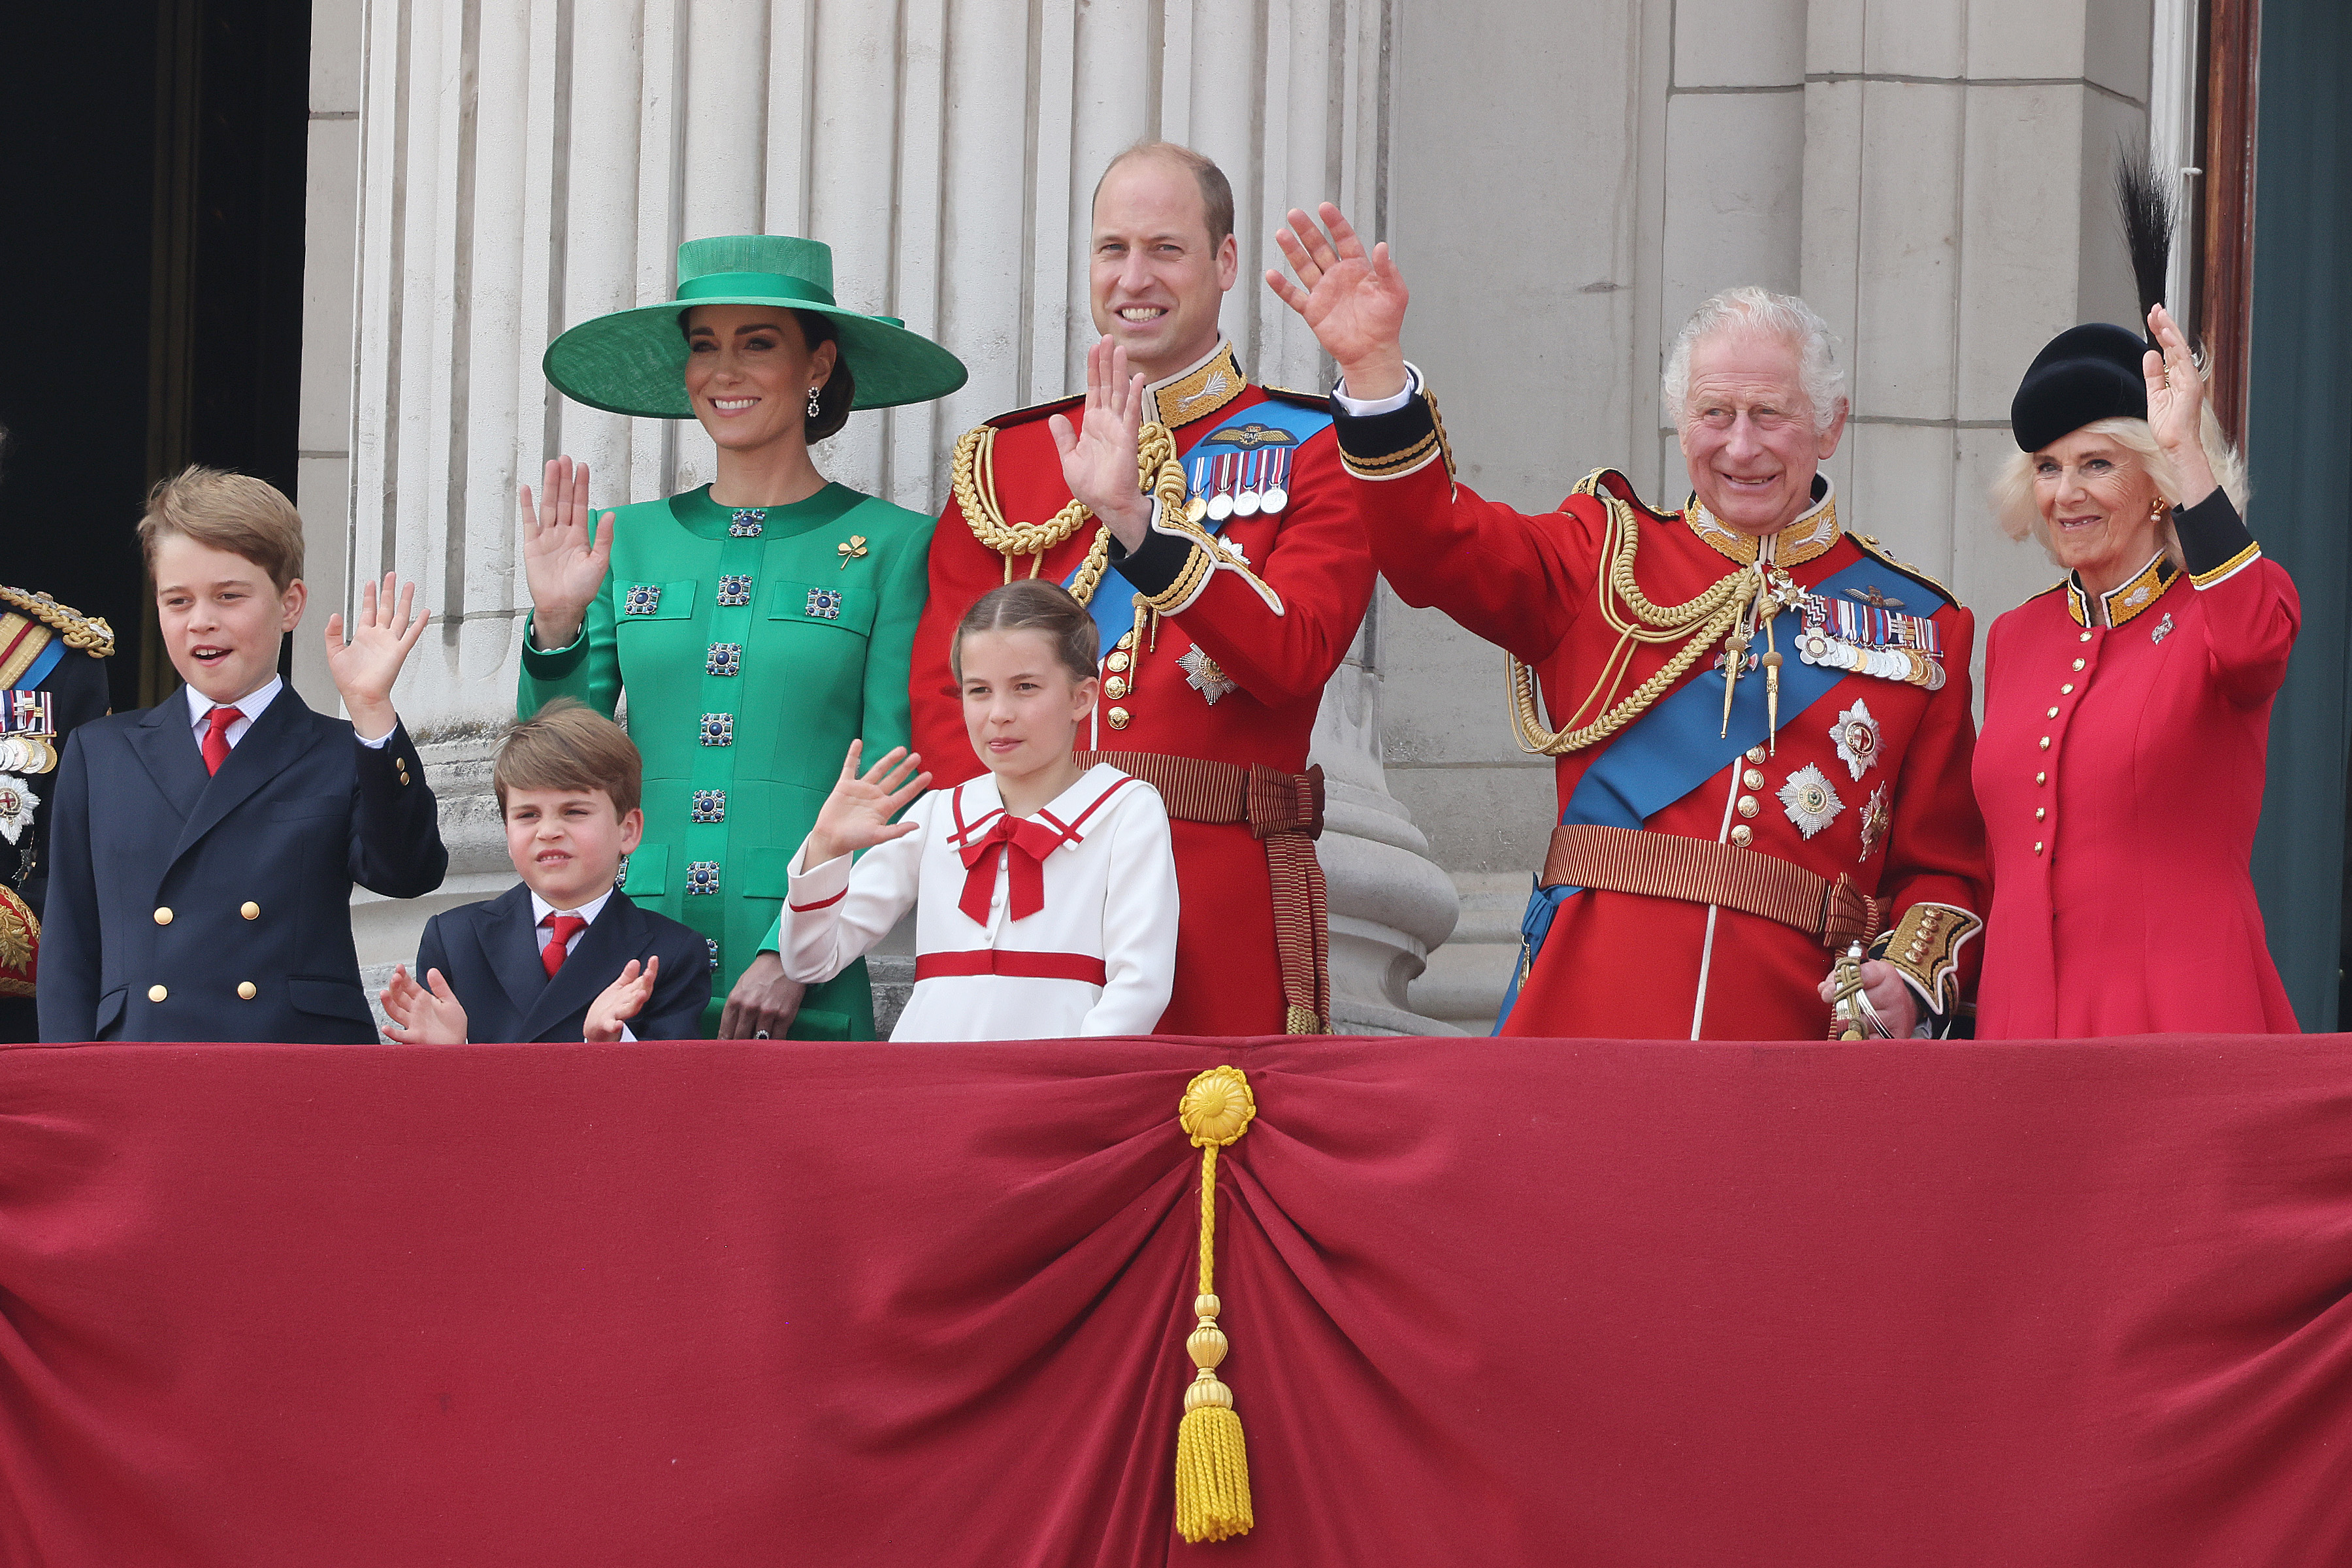 Princess Catherine, Prince William, Queen Camilla, King Charles III, Prince George, Princess Charlotte, and Prince Louis on the balcony of Buckingham Palace watching a fly-past of aircraft by the Royal Air Force during Trooping the Colour on June 17, 2023 in London, England | Source: Getty Images